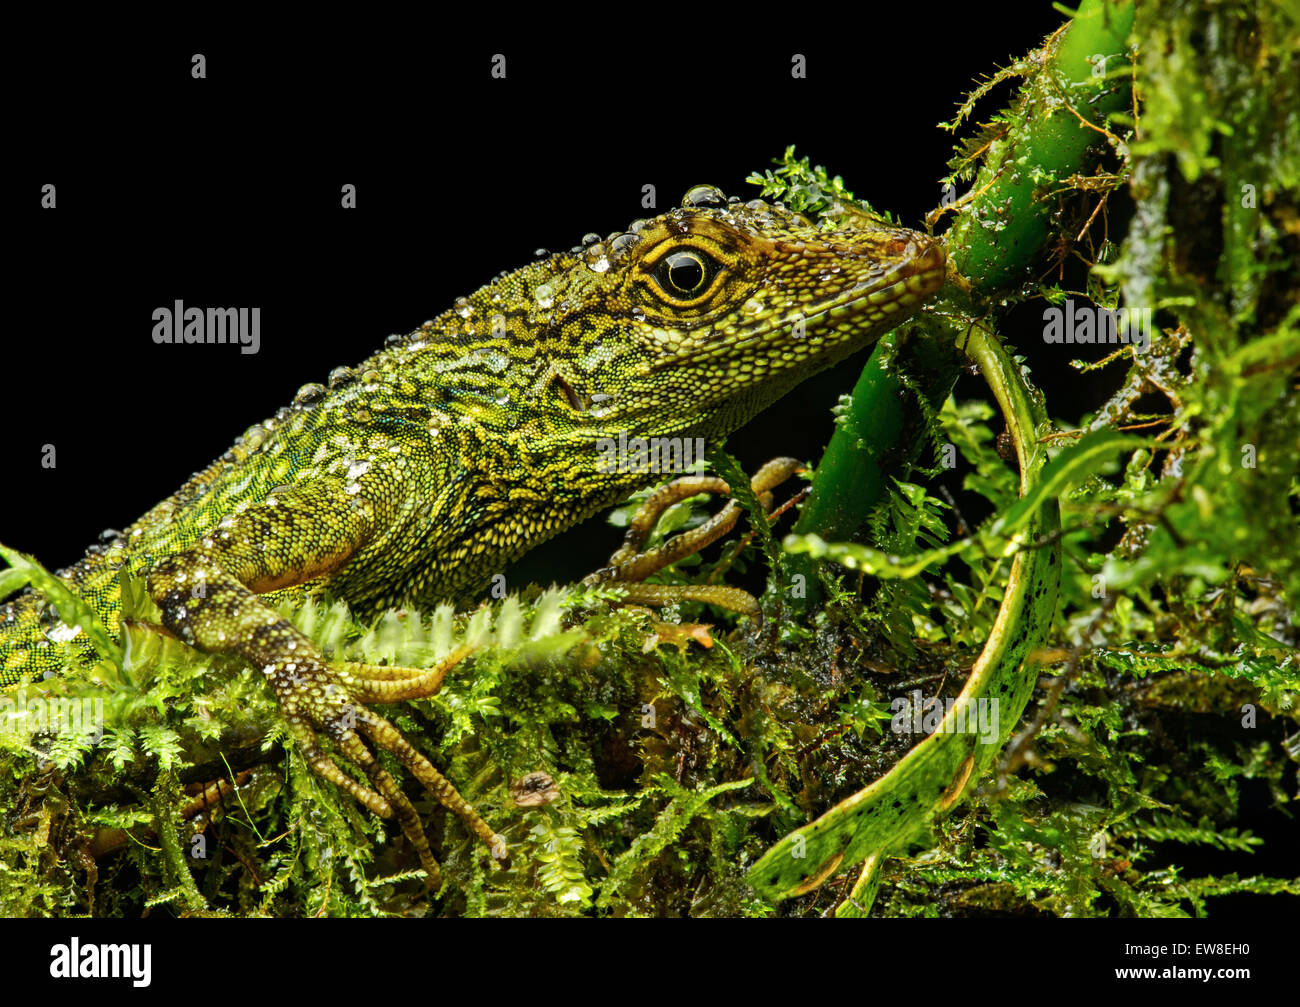 Male Gem Anole lizard (Anolis gemmosus), Iguana family (Iguanidae), Pacific slopes of the Andean cloud forest, Mindo, Ecuador Stock Photo